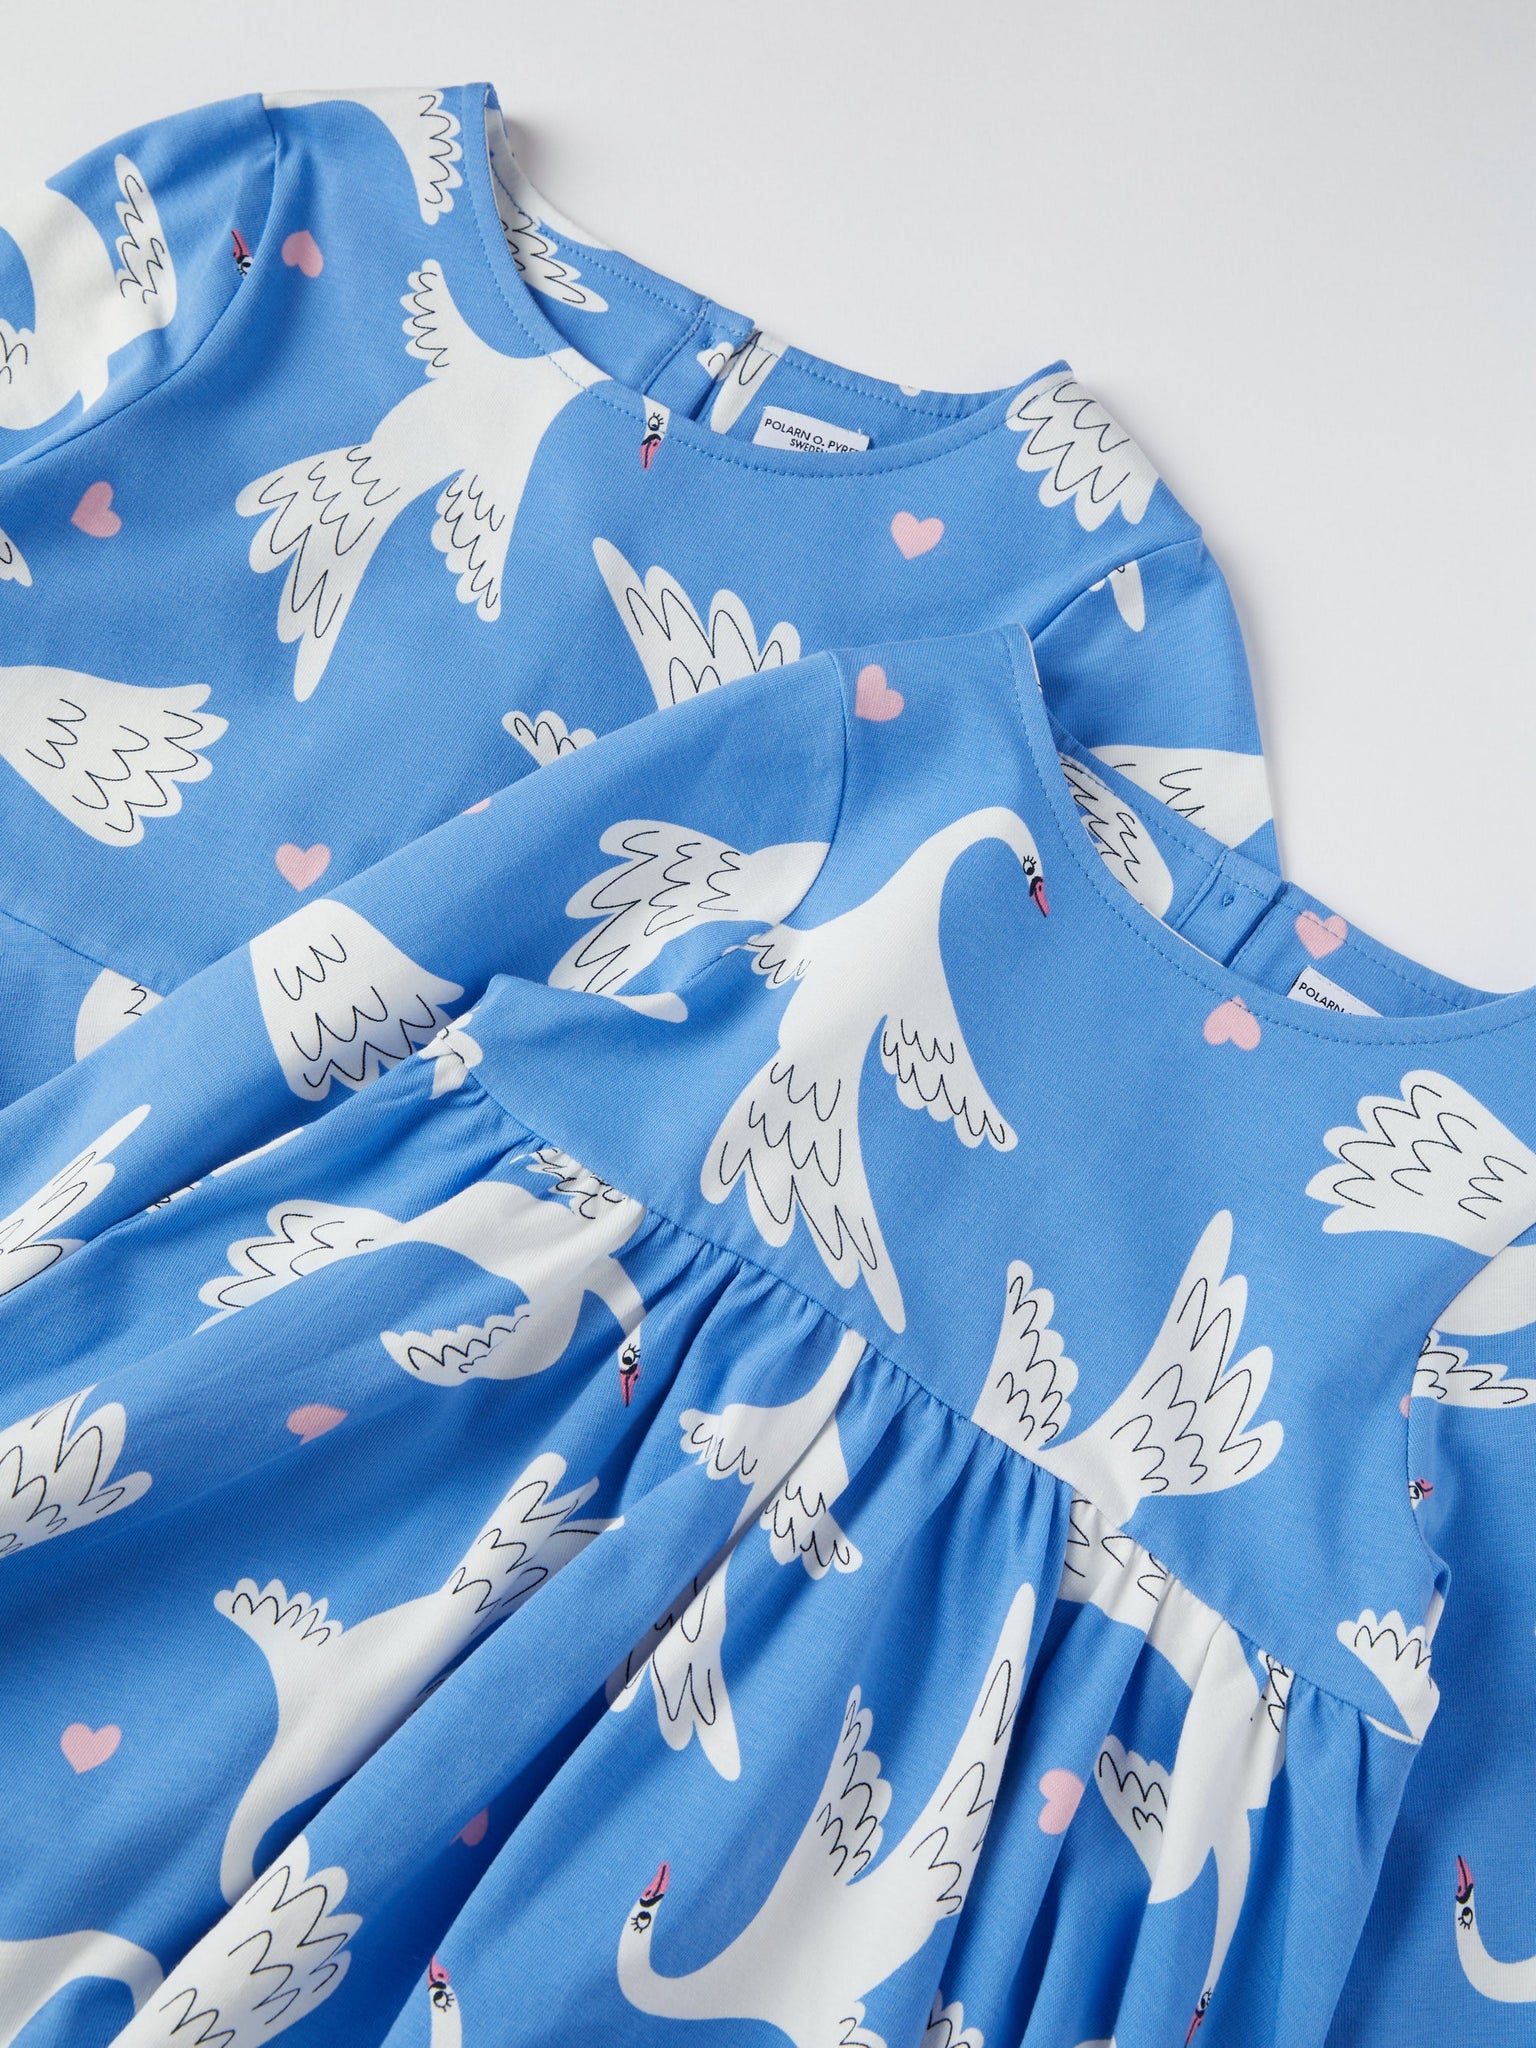 Organic Cotton Swan Print Kids Dress from the Polarn O. Pyret kidswear collection. The best ethical kids clothes